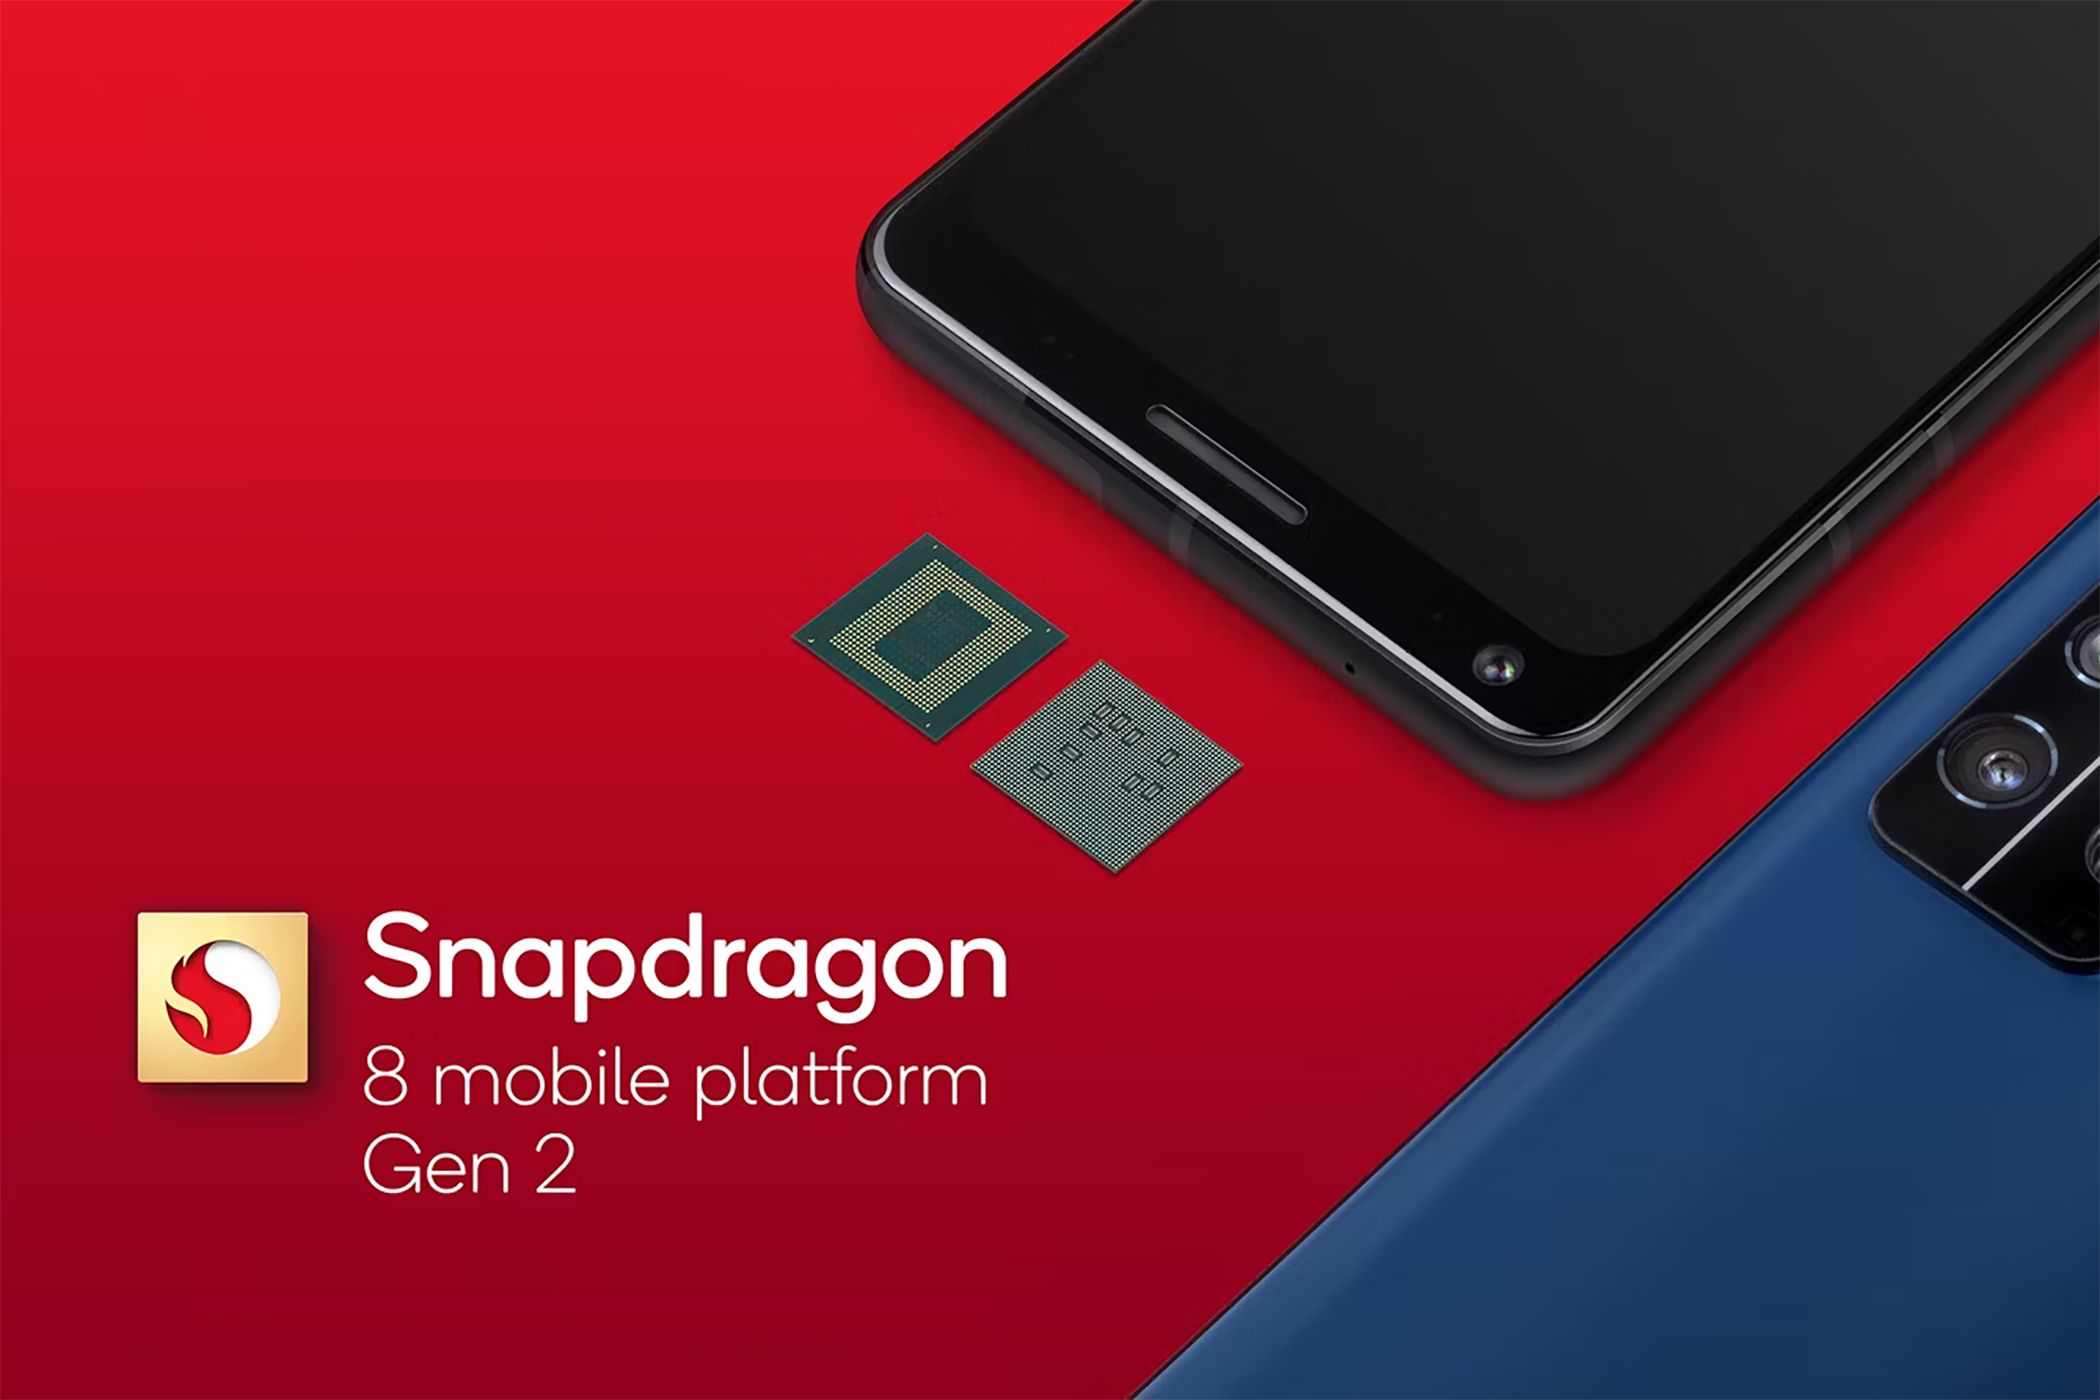 Qualcomm Snapdragon 8 Gen 2 logo next to the chip and reference devices on a red background.